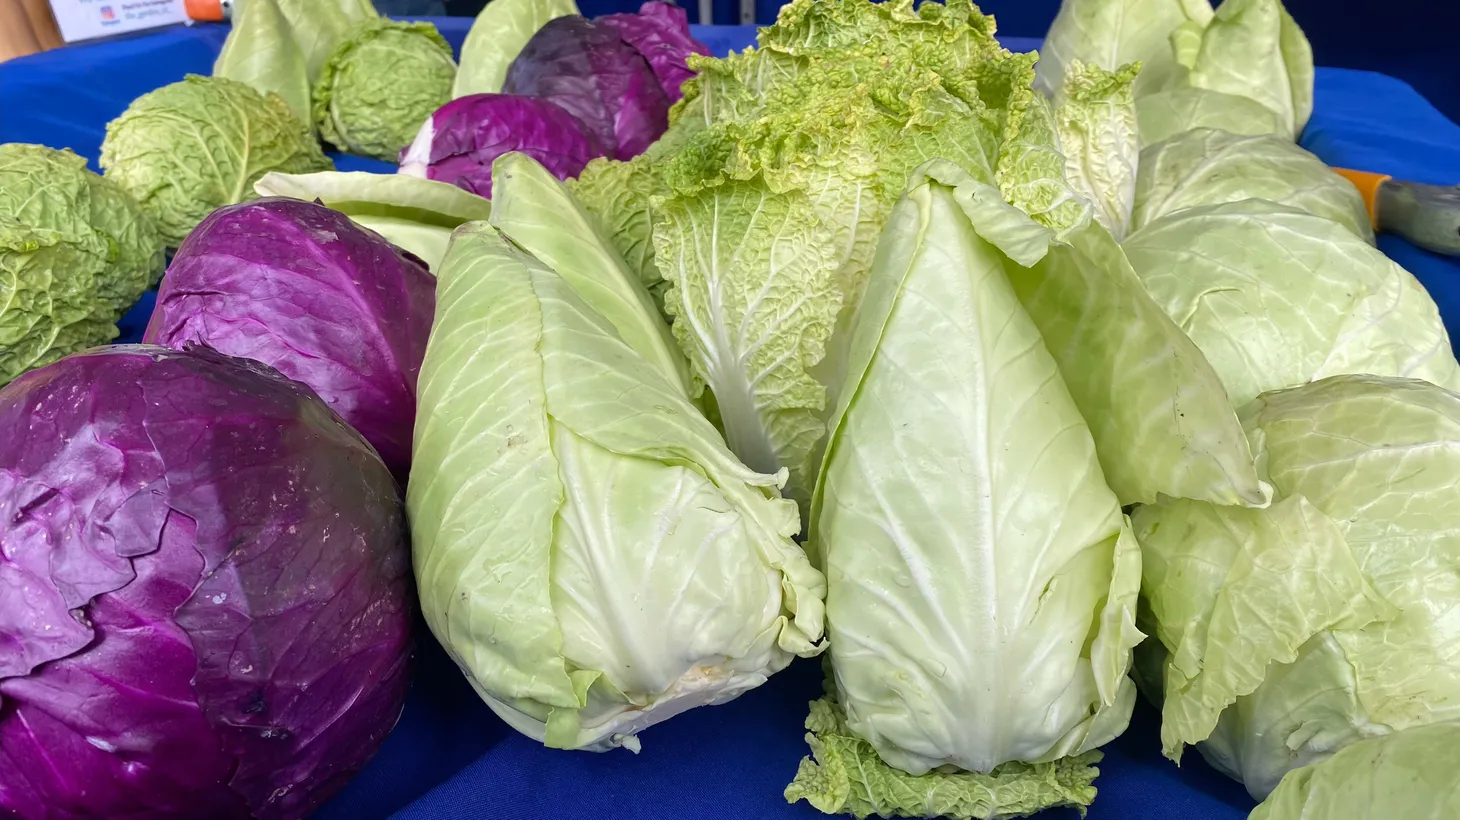 Reminiscent of their Saturday Night Live family counterparts, conehead cabbage makes their appearance at the market.